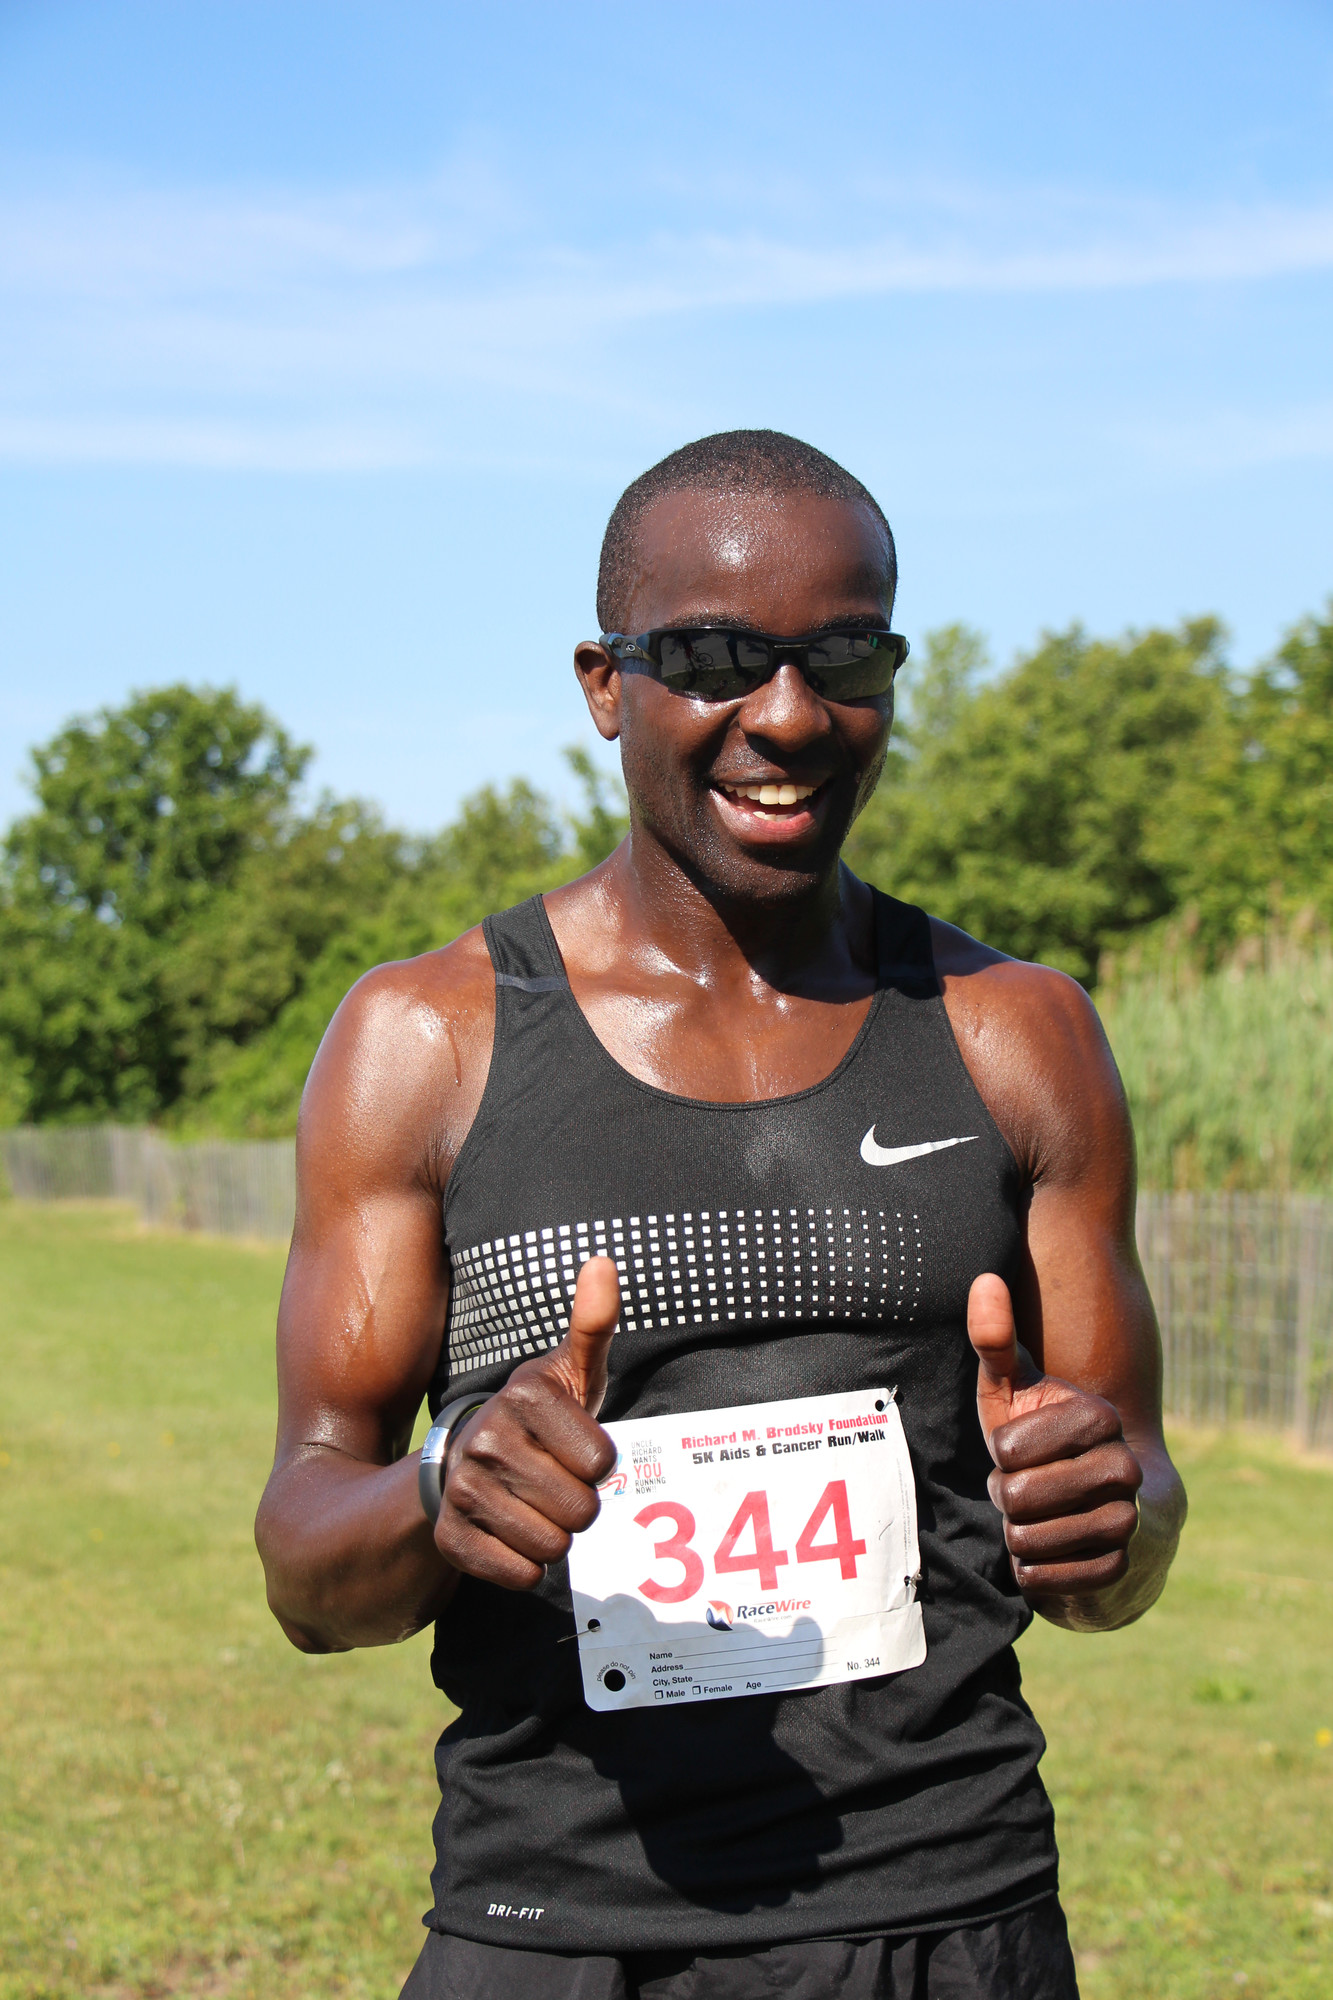 Mwangi Gitahi, from New York City, took first place in the field of nearly 250 participants.